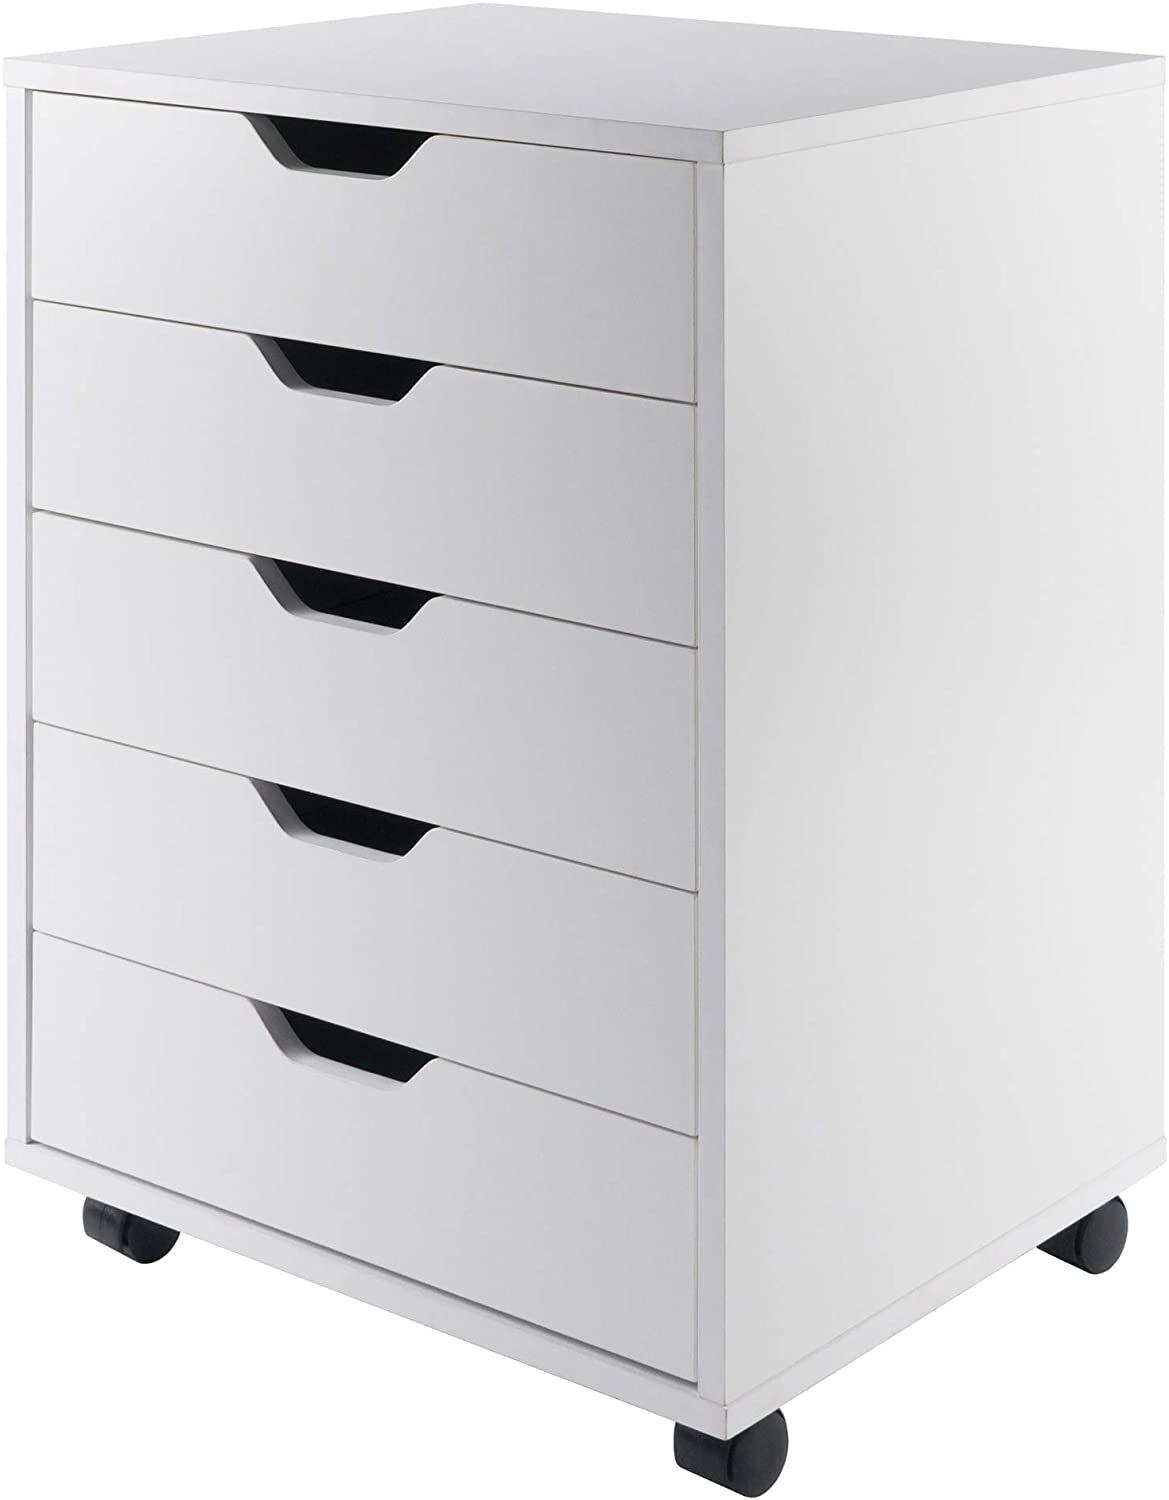 Winsome Halifax Small Cabinet With Drawers